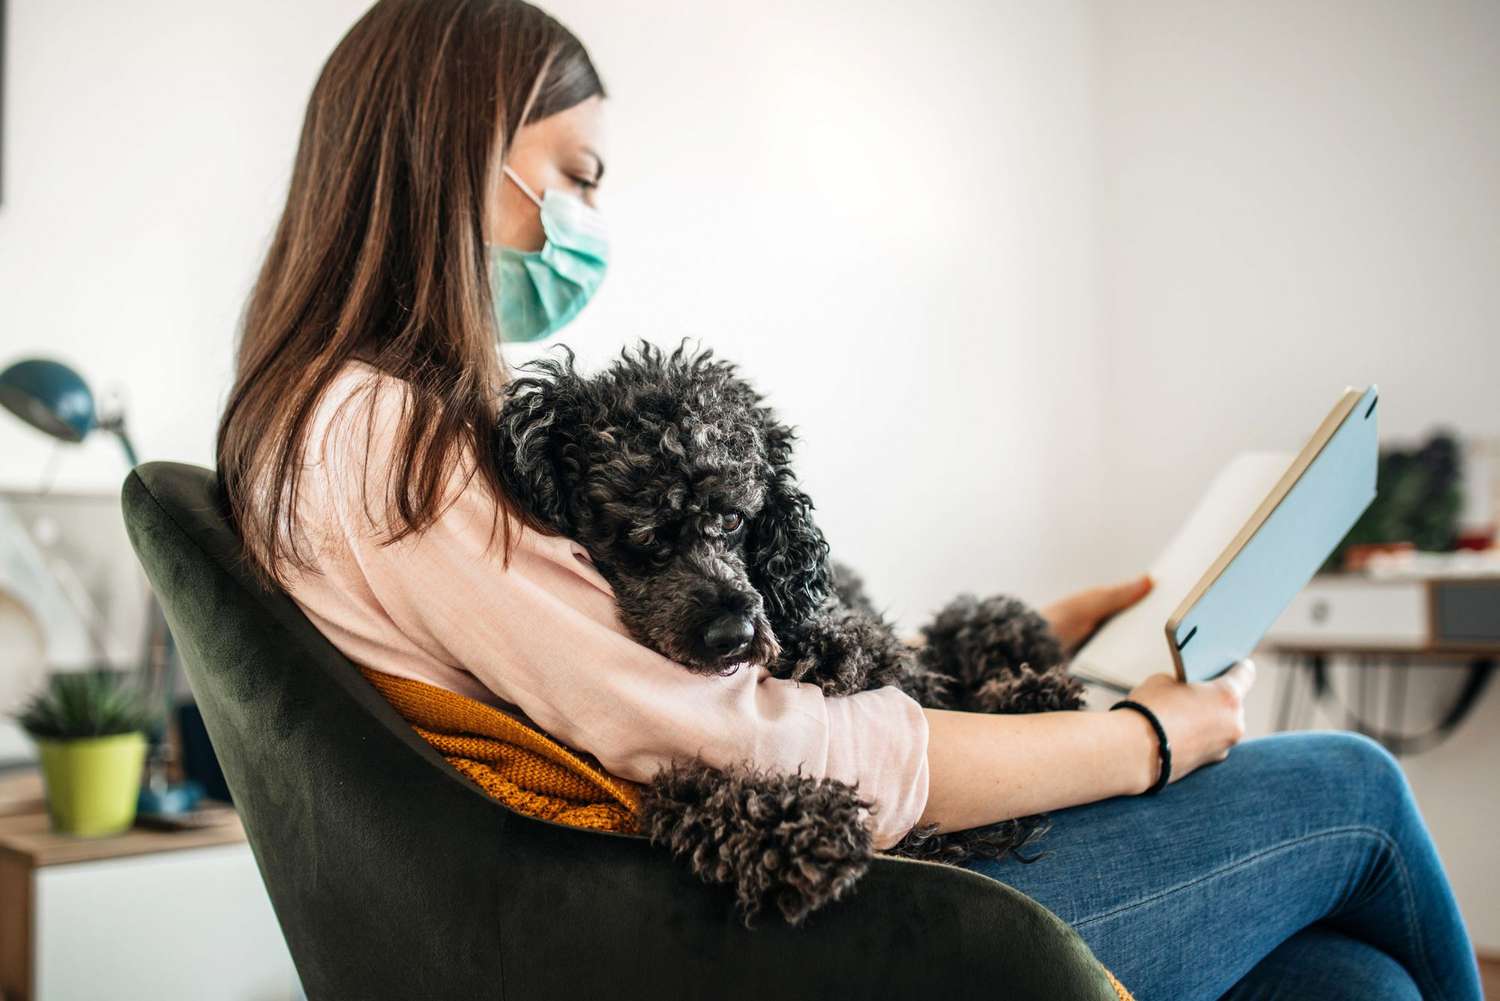 womn earing face mask with dog on her lap while reading a book